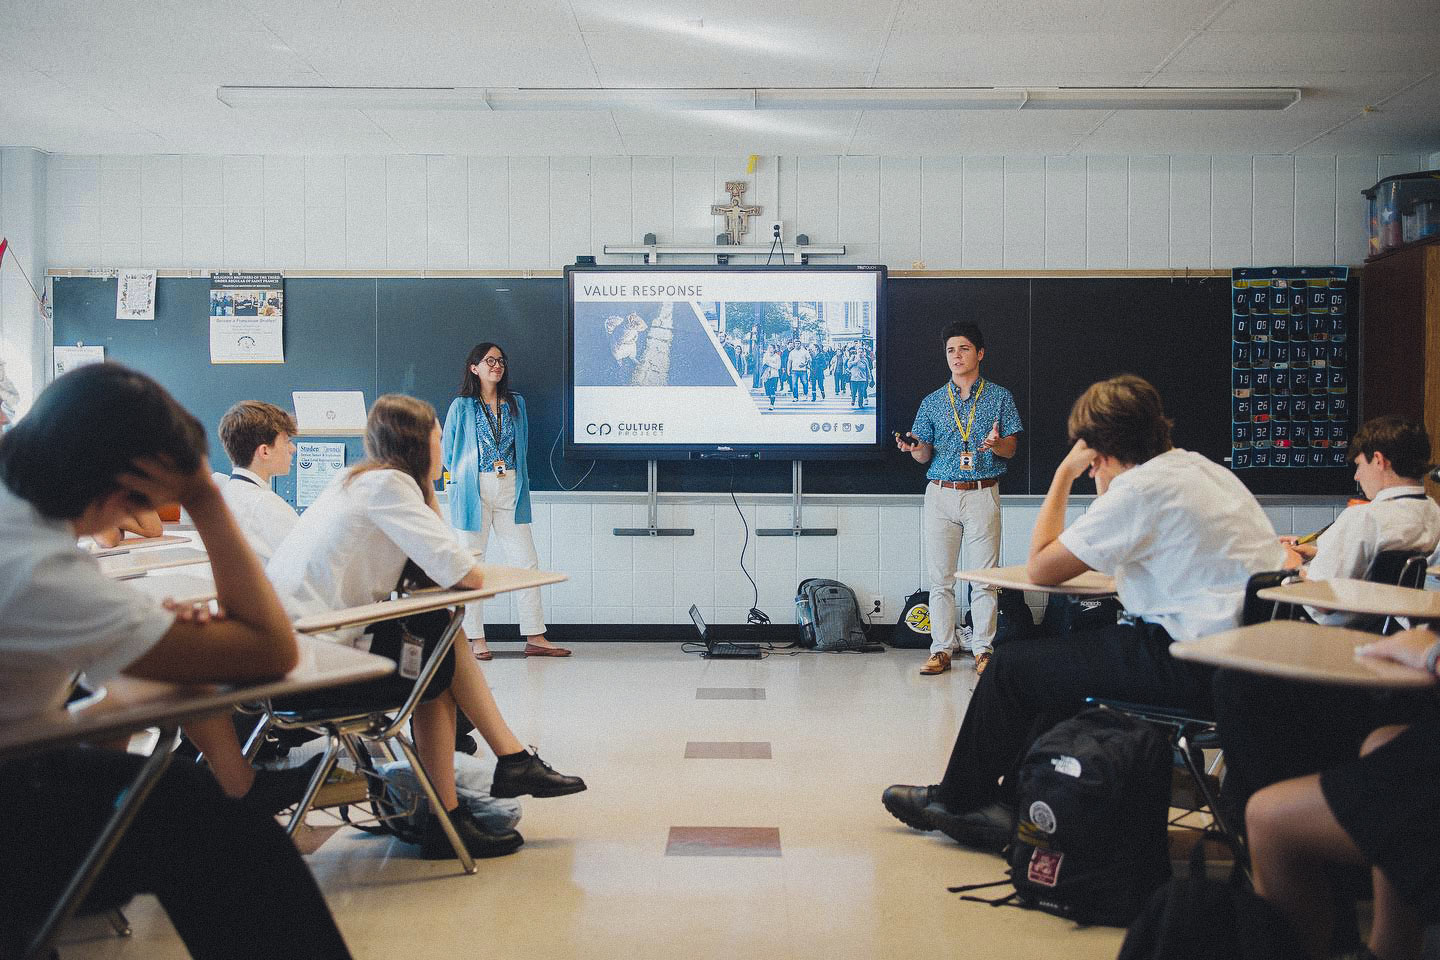 Two Culture Project missionaries present to a group of highschoolers in a school room